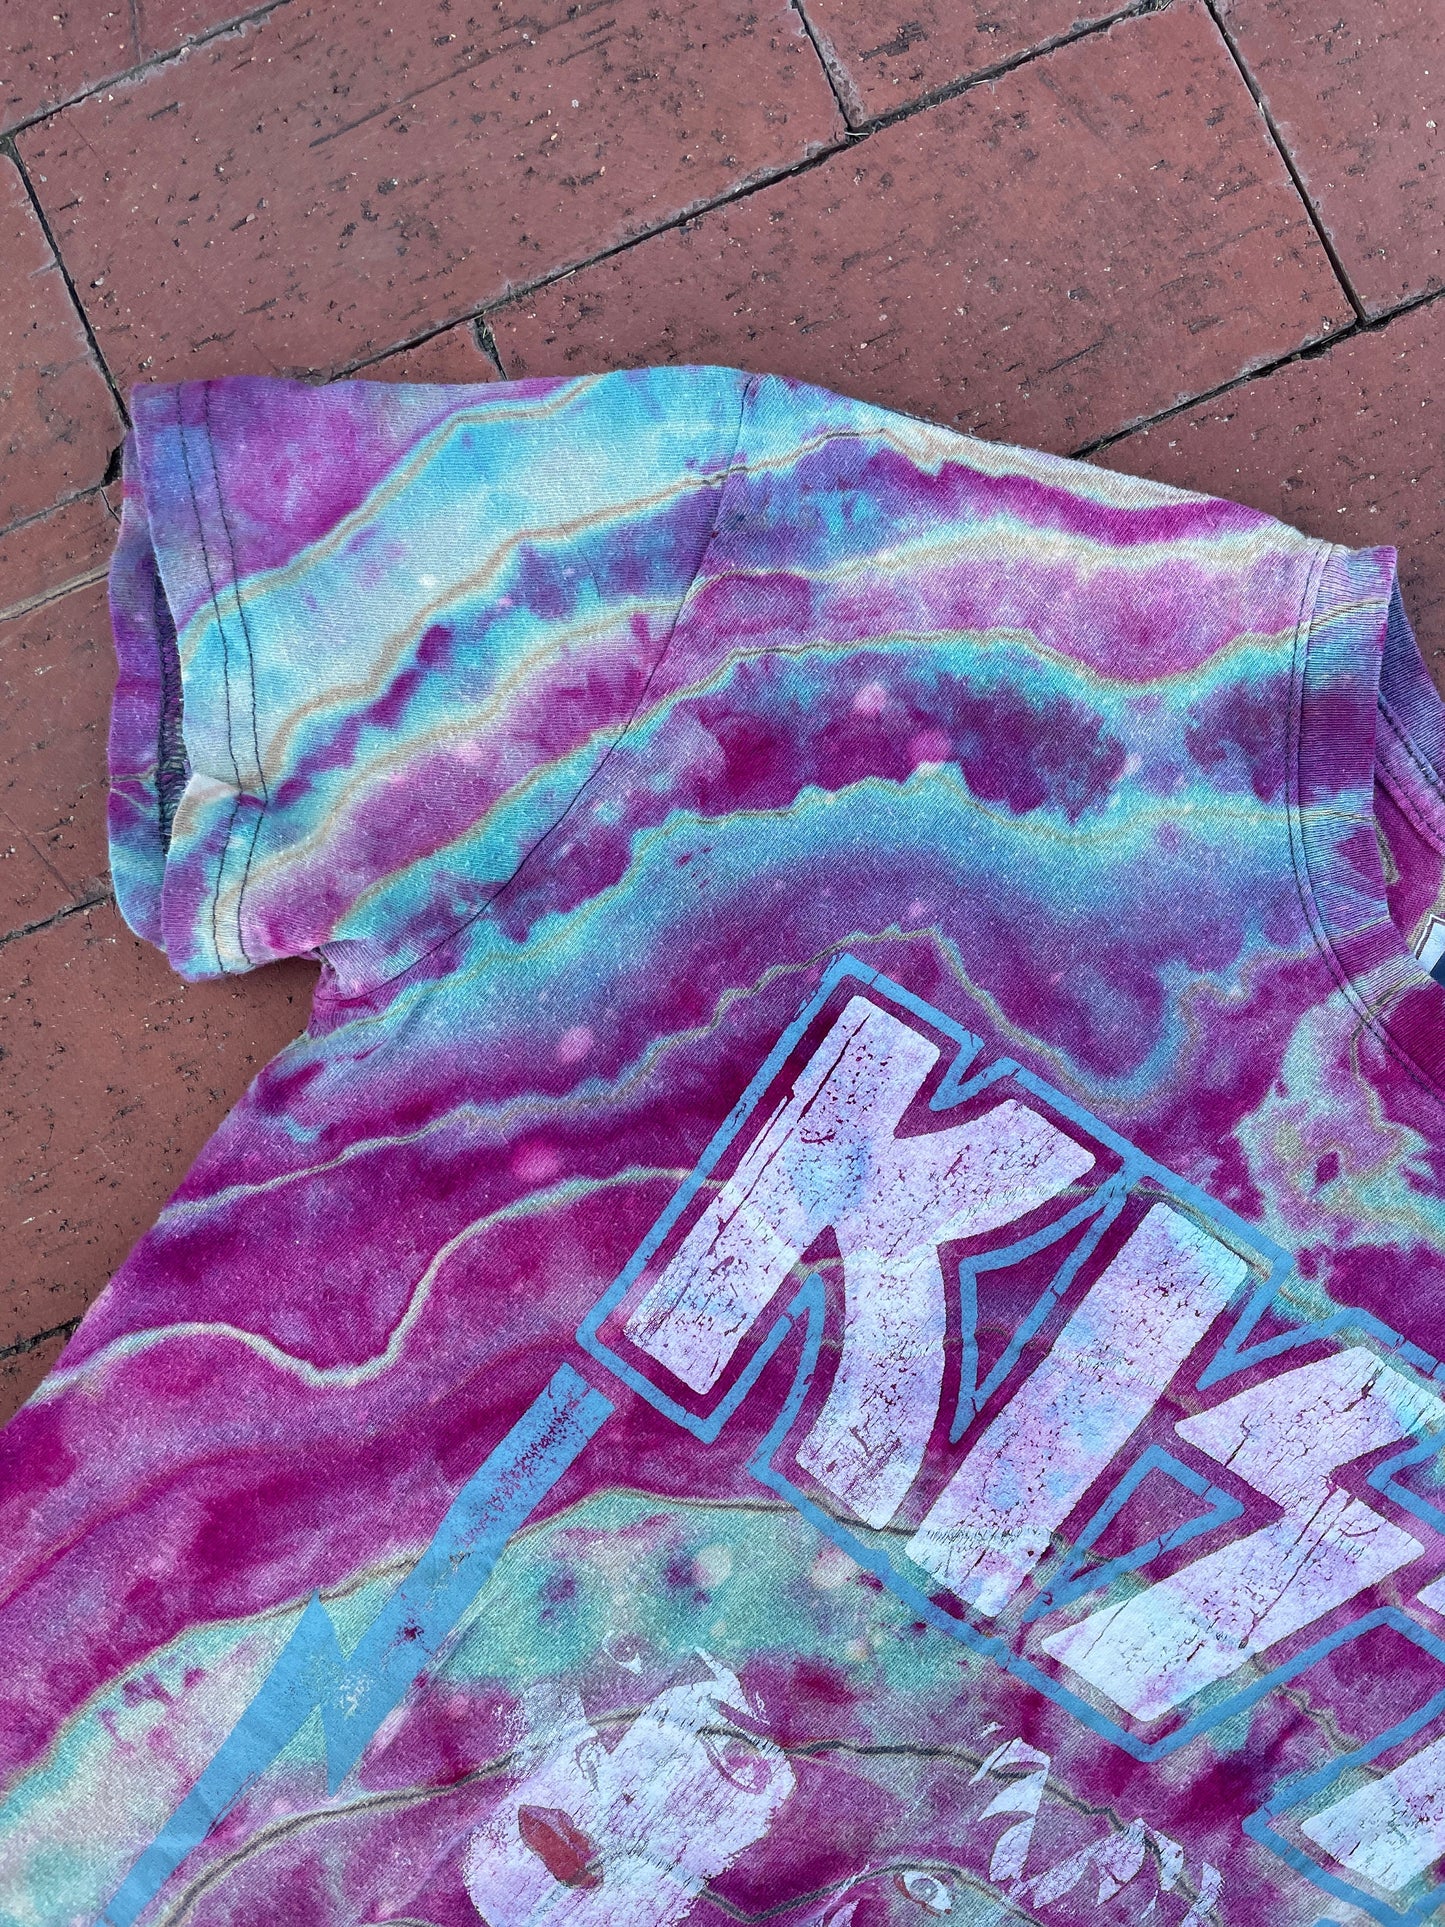 SMALL Women's KISS Handmade Reverse Tie Dye Short Sleeve T-Shirt | One-Of-a-Kind Upcycled Pink and Blue Galaxy Geode Top